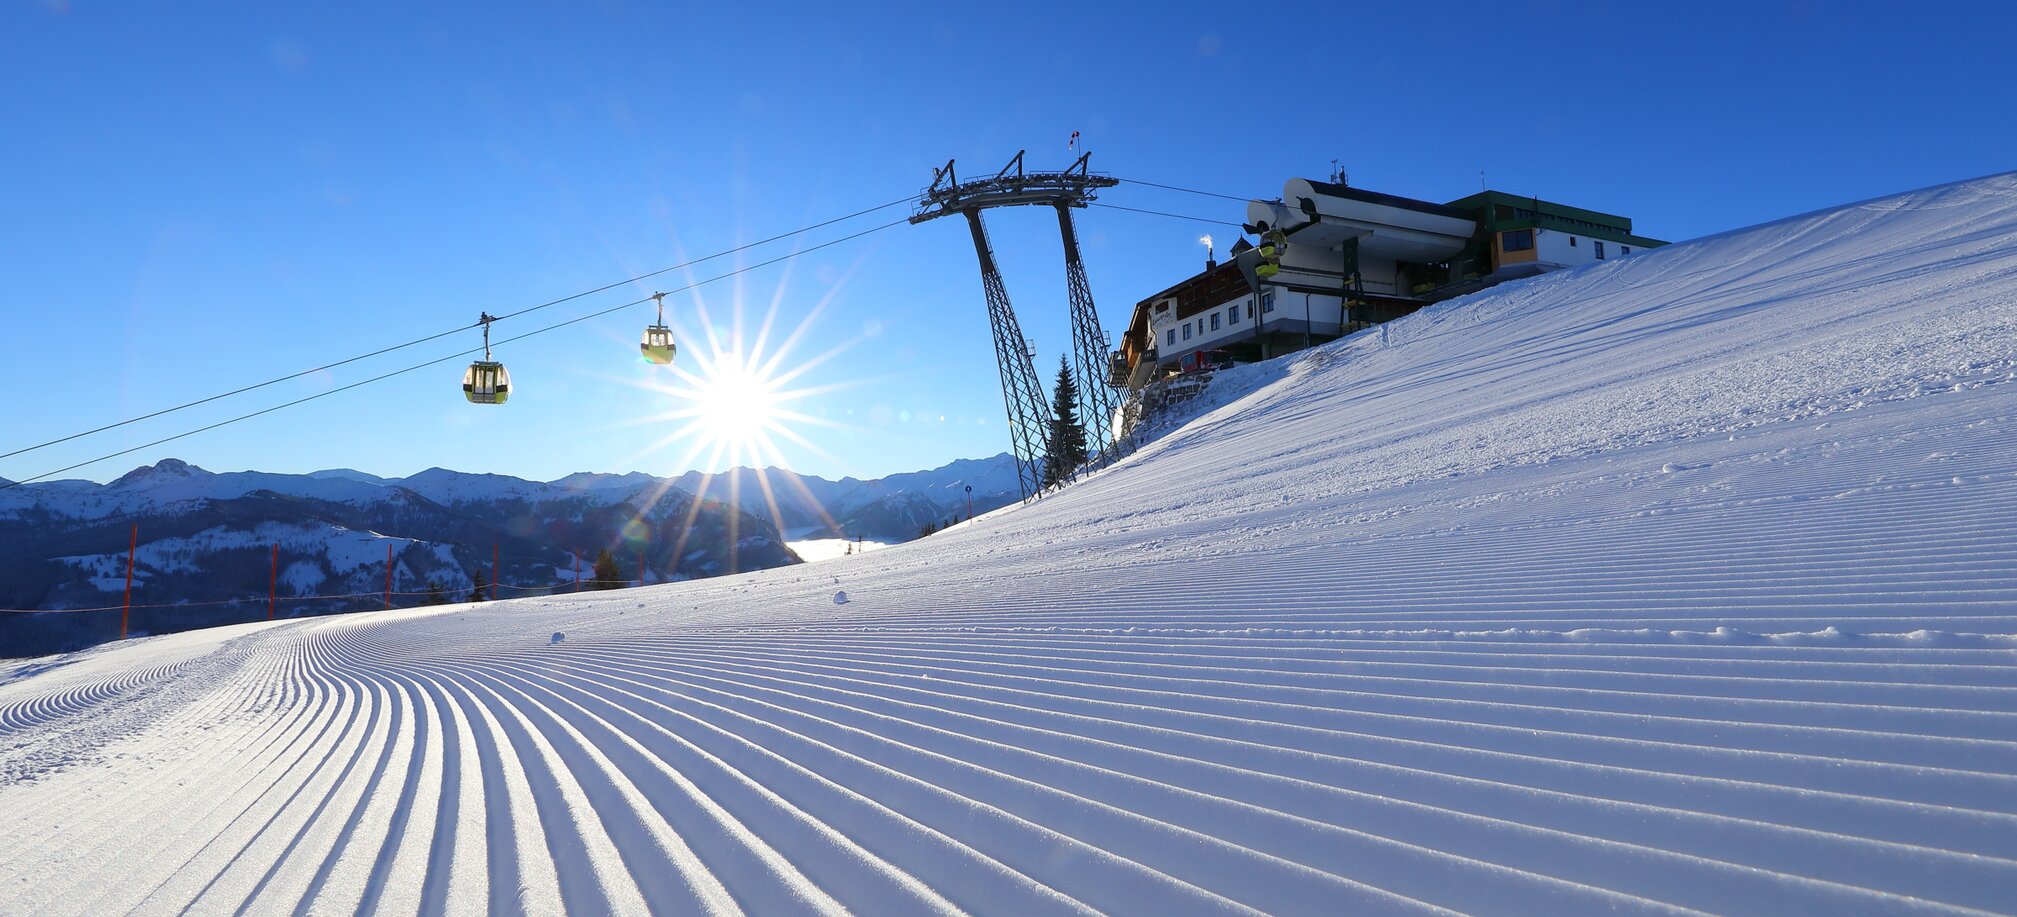 The rising sun illuminates the freshly prepared piste and the cable car passes over it | © Tourismusverband Großarltal